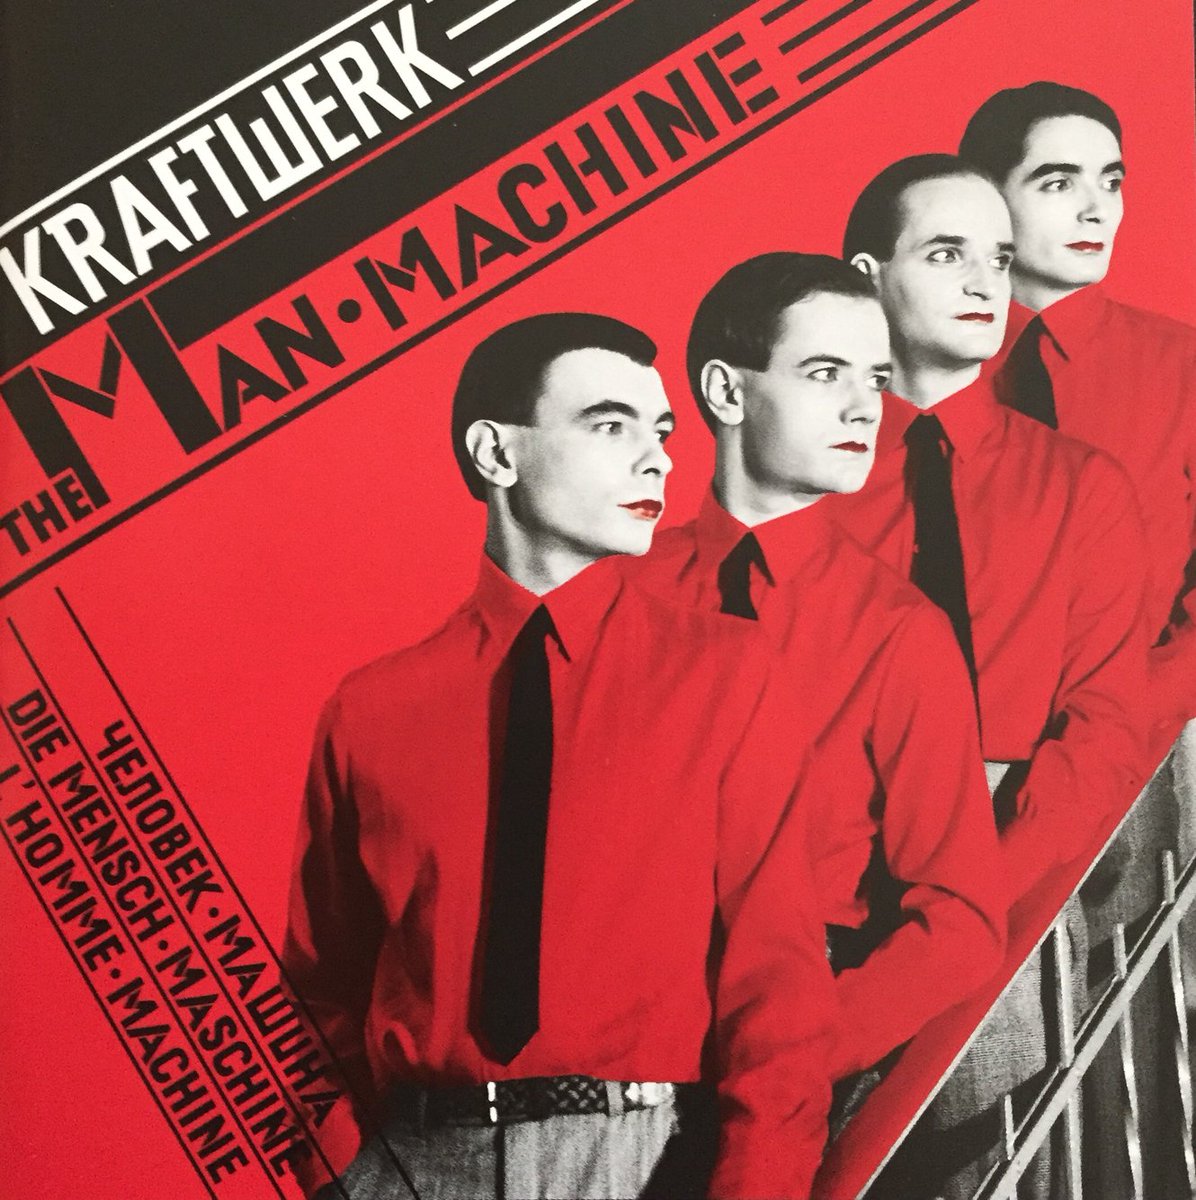  #everyalbumIown The Man Machine. Kraftwerk. 1978.Top 3 tunes: Spacelab, The Model, Neon LightsYou can skip: nothing, there's only 6 tracksRating: 10/10So gloriously late 1970s sci-fi, I can picture the Mat Irvine spaceships. Neon Lights is magical. Kraftwerk's best!